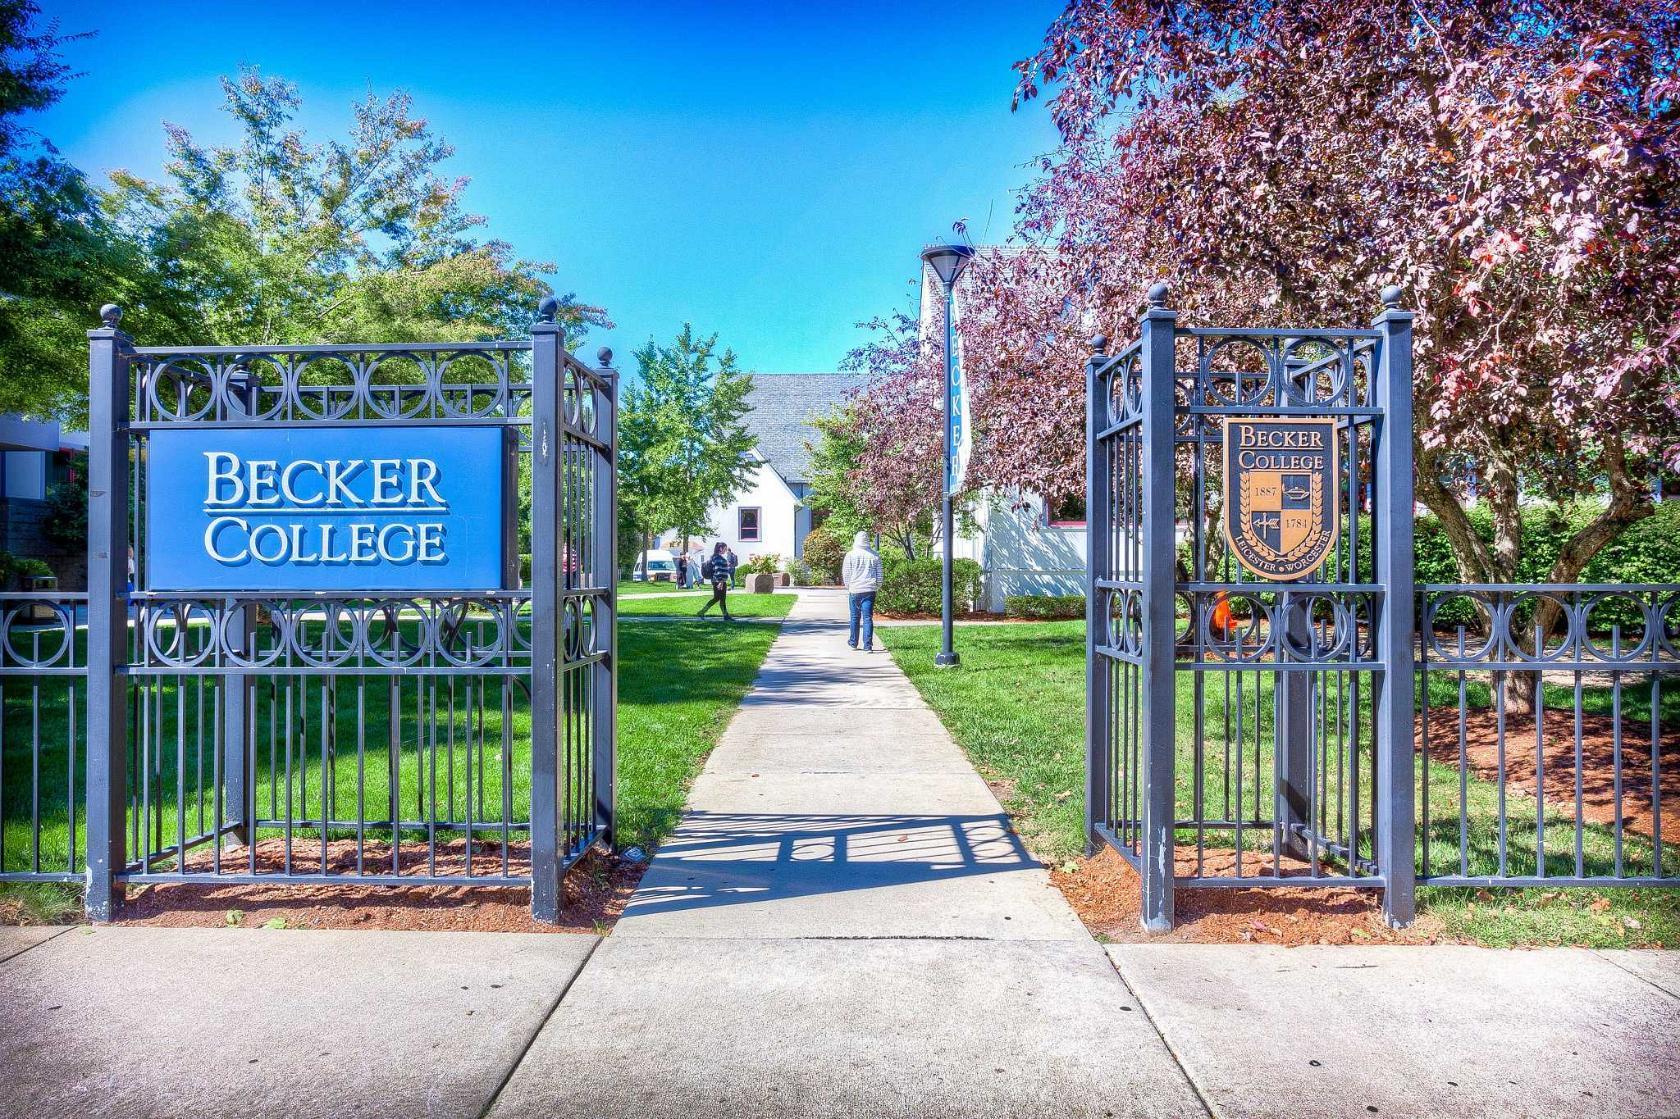 YouVisit / Becker College